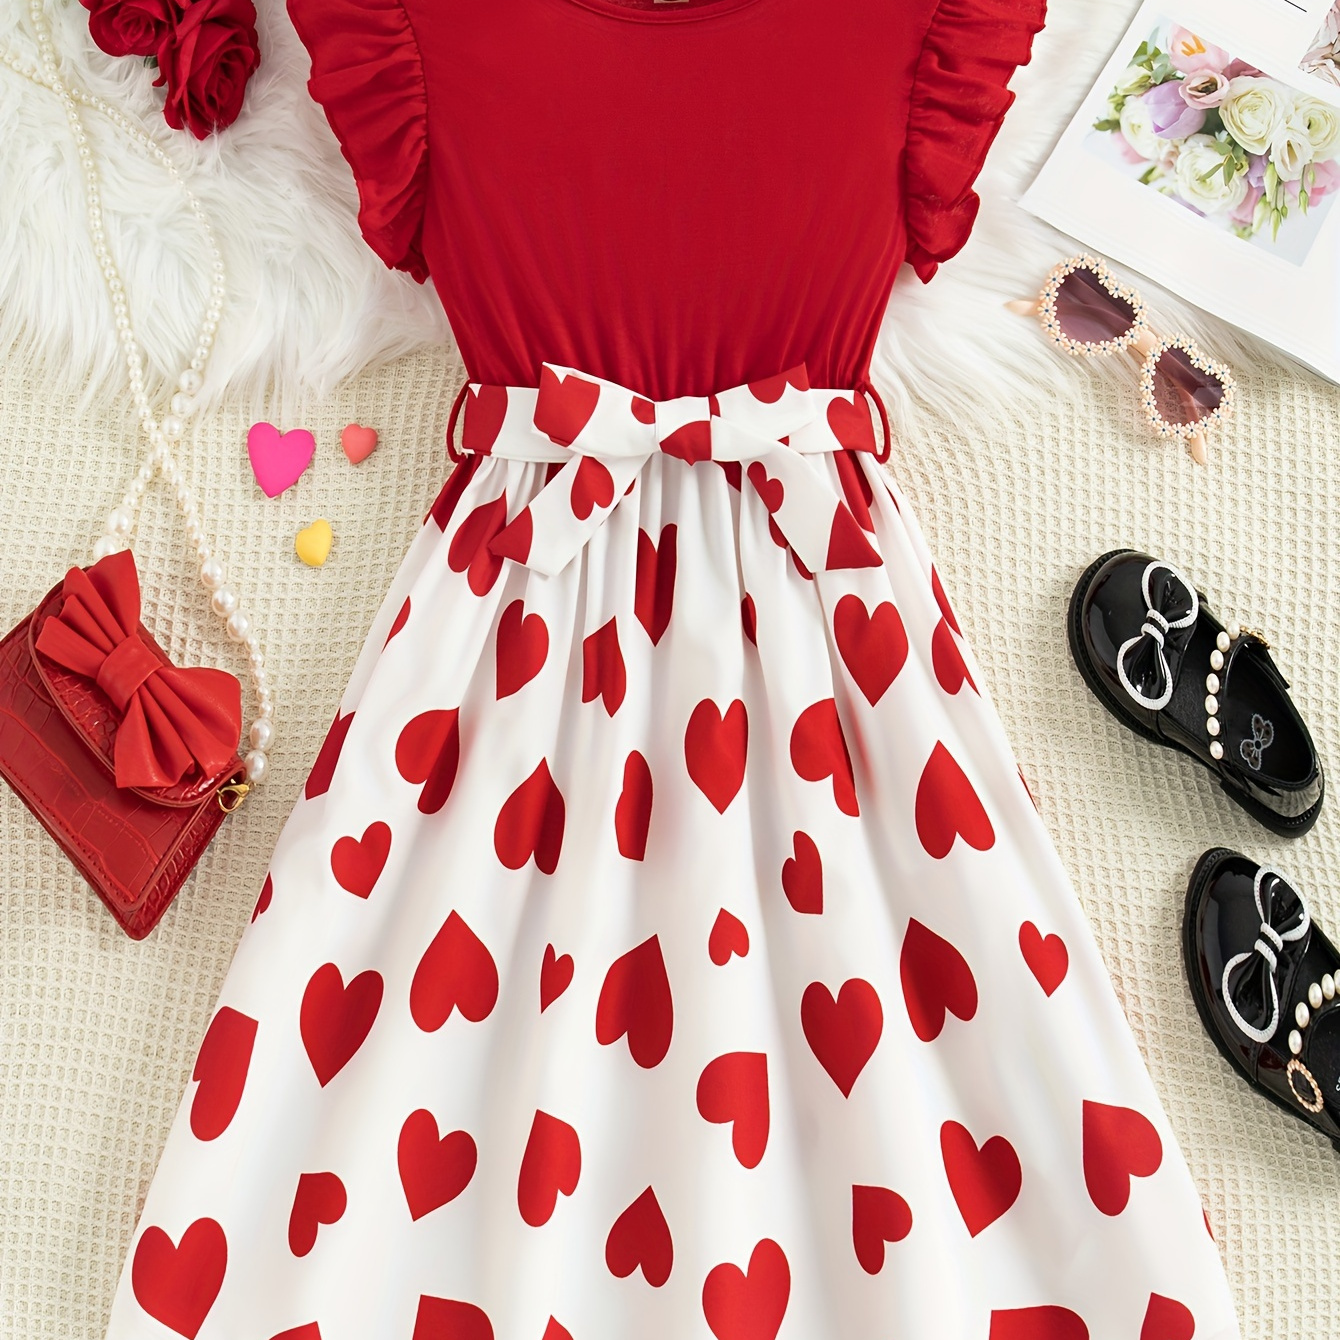 

Girls' Sleeveless Ruffle Shoulder Love Heart Print Dress With Belt, Casual Round Neck Summer Fashion For Youth, Ladylike Regular Fit - Red